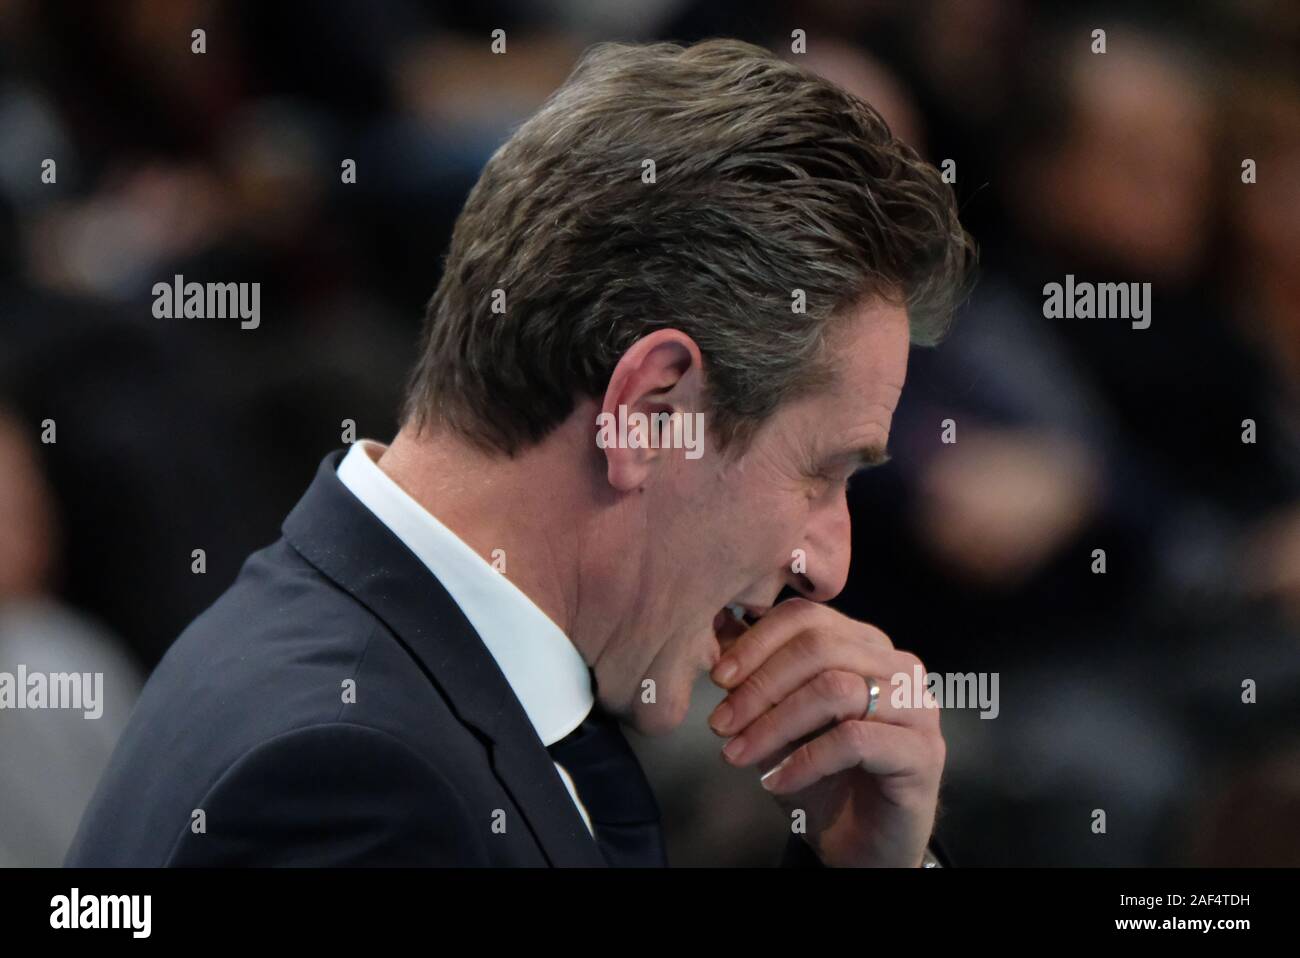 Trento, Italy. 12th Dec, 2019. angelo lorenzetti - coach itas trentino during Trentino Itas vs Fenerbahce HDI Sigorta Istambul, Volleybal Champions League Men Championship in Trento, Italy, December 12 2019 Credit: Independent Photo Agency/Alamy Live News Stock Photo